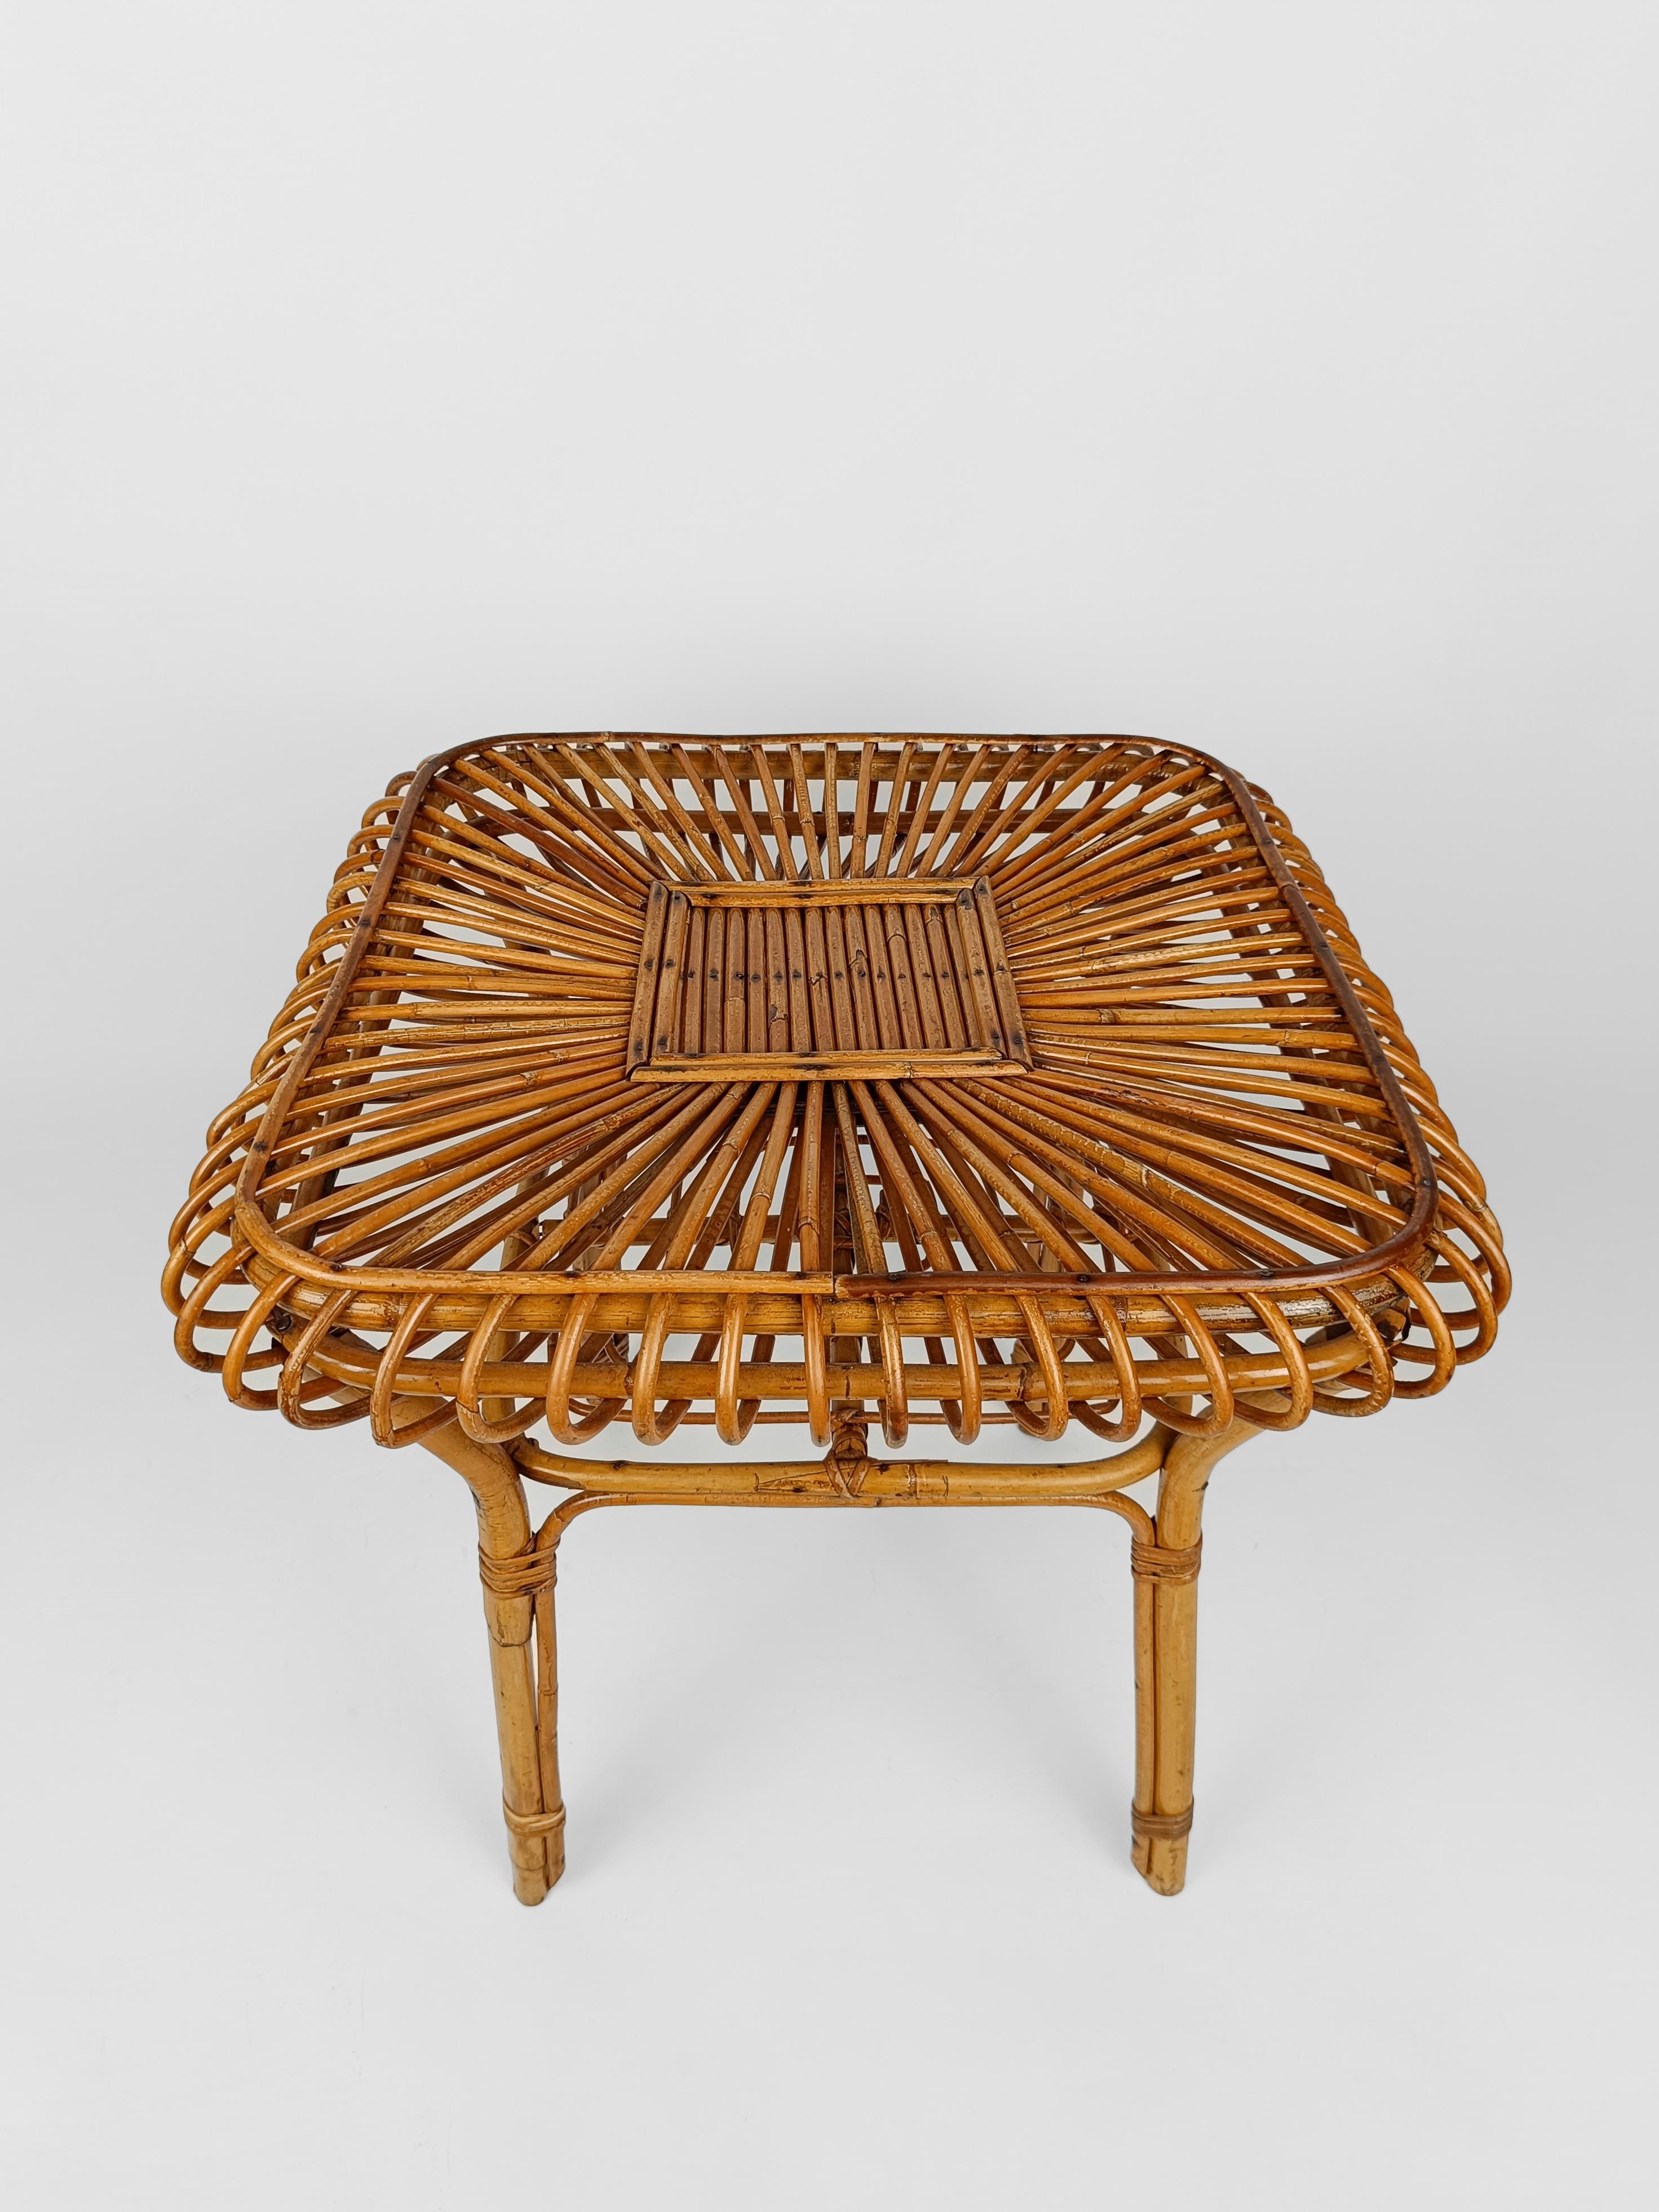 Vintage Cane and Rattan Set of 2 shell-shaped Armchairs with Coffe Table, 1960s For Sale 11